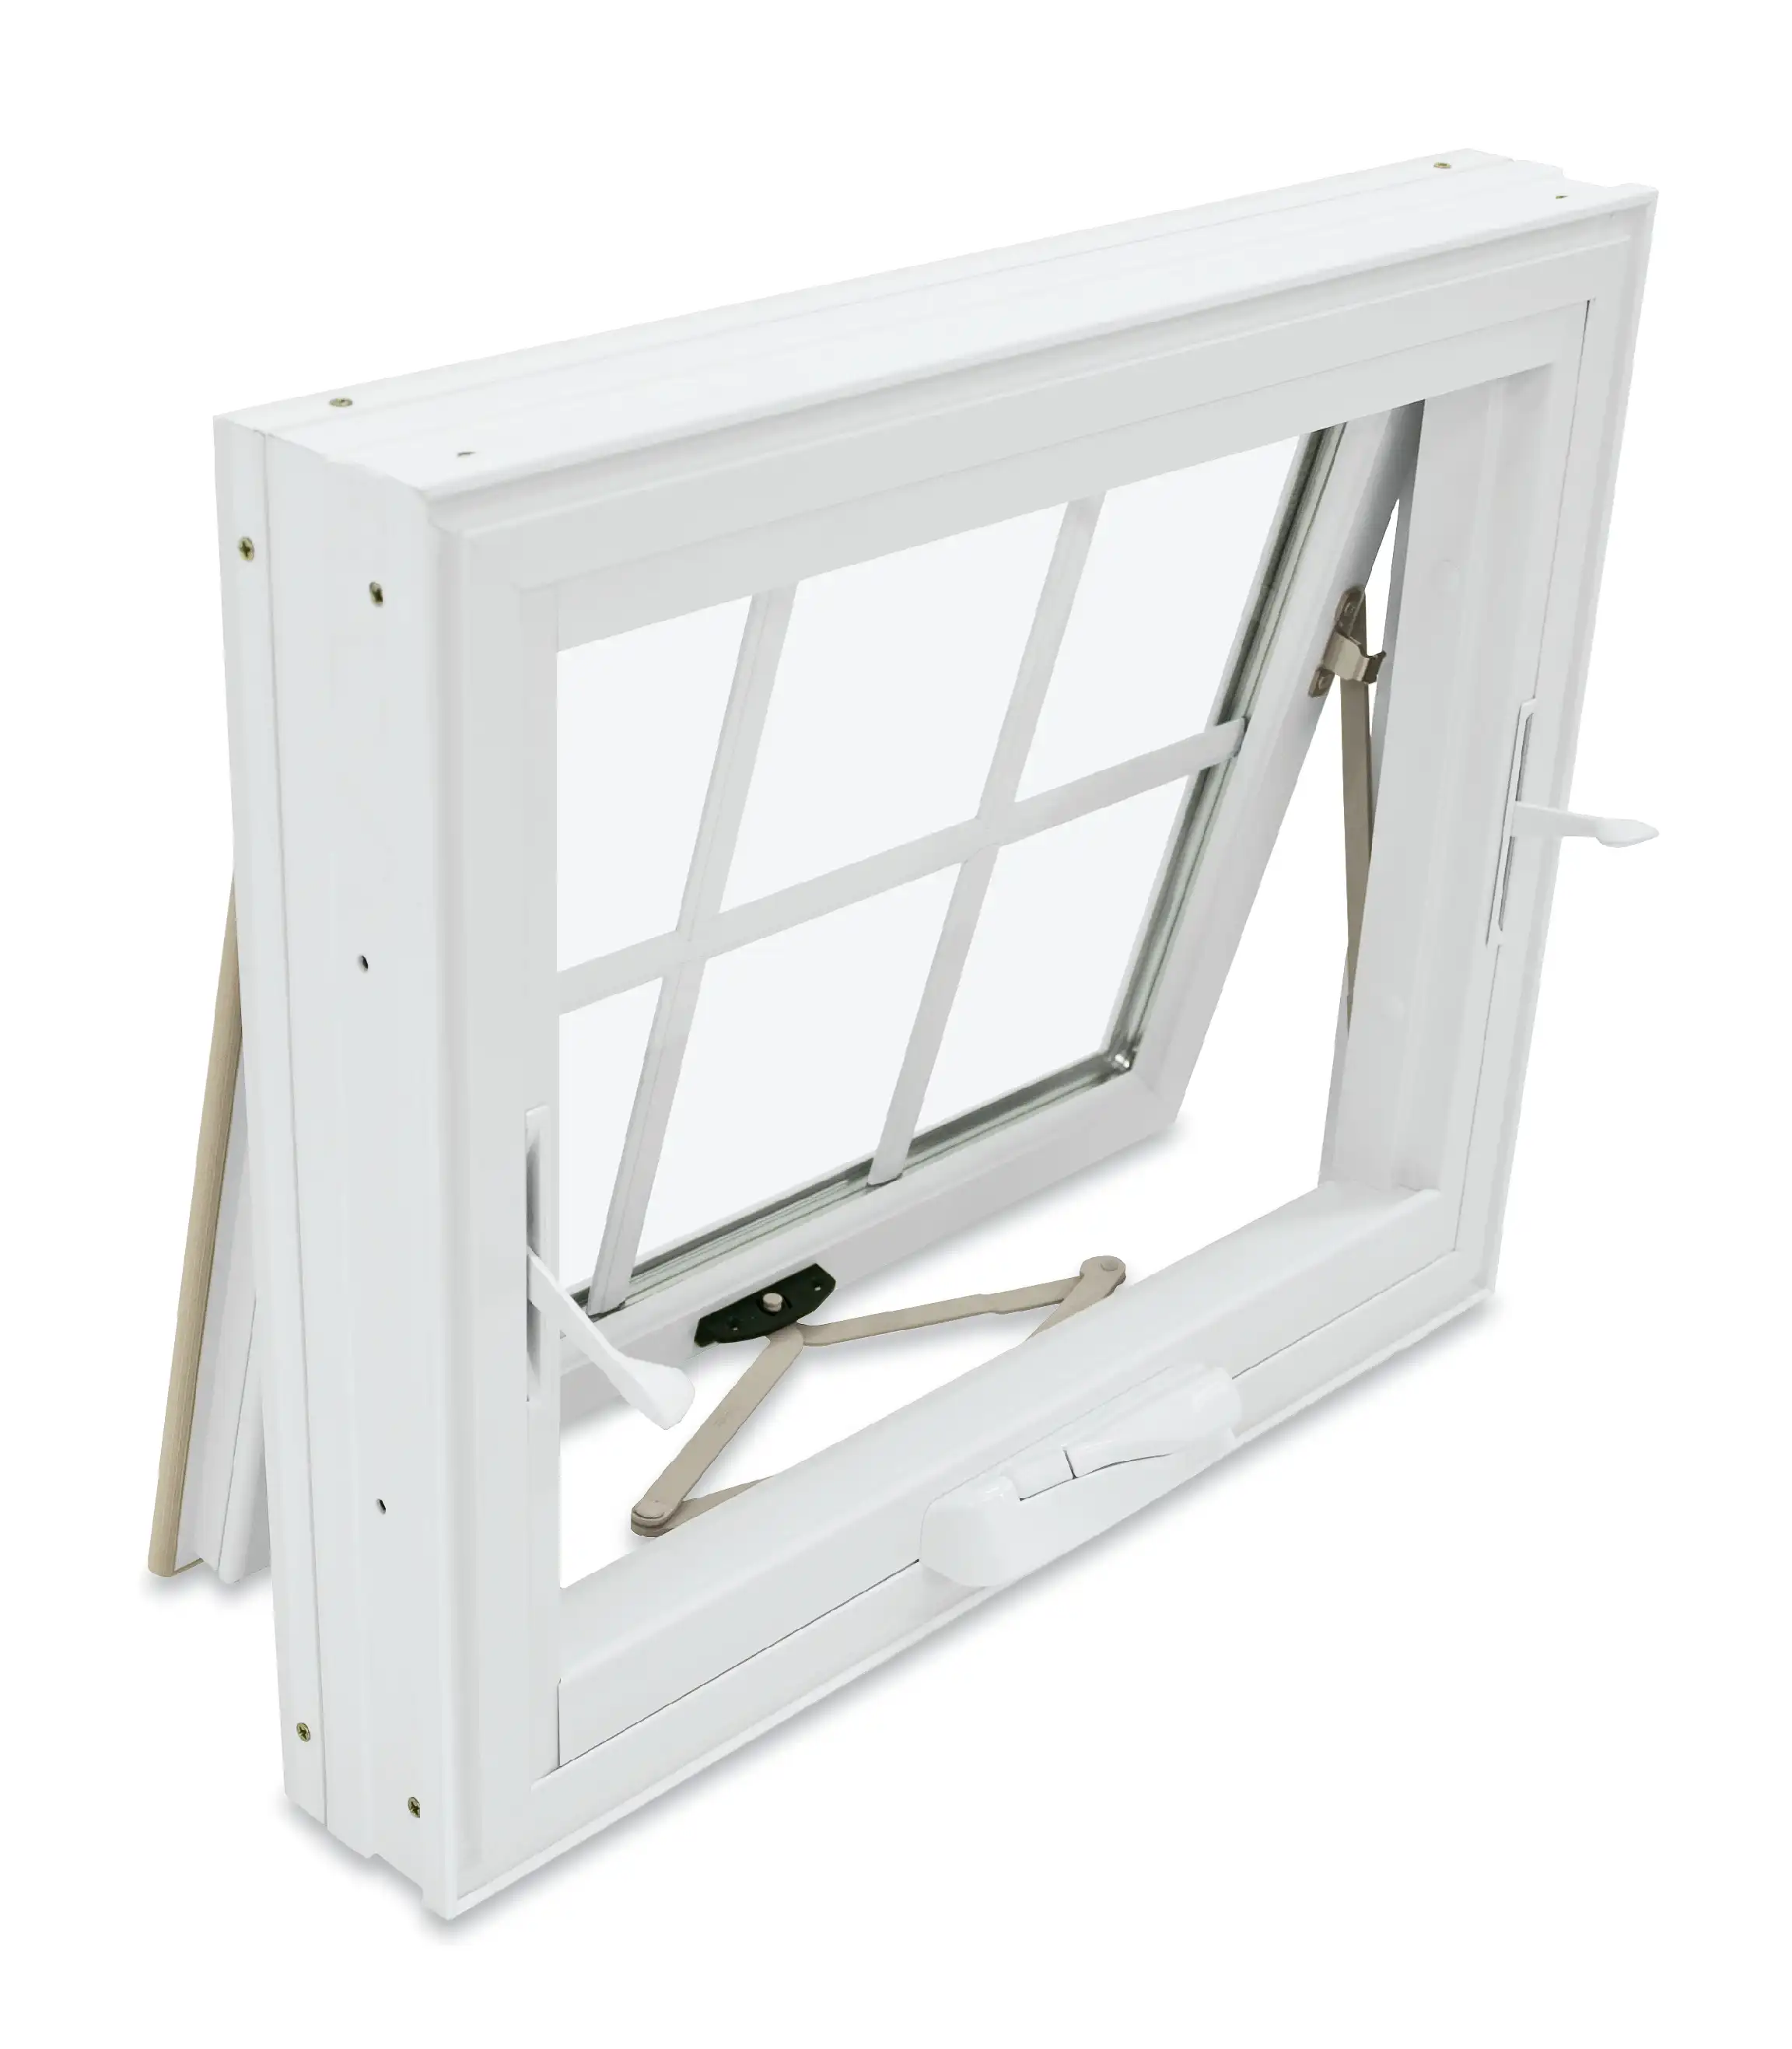 An opened white Marvin Replacement Awning window showcasing window latches and roto-gear hardware.